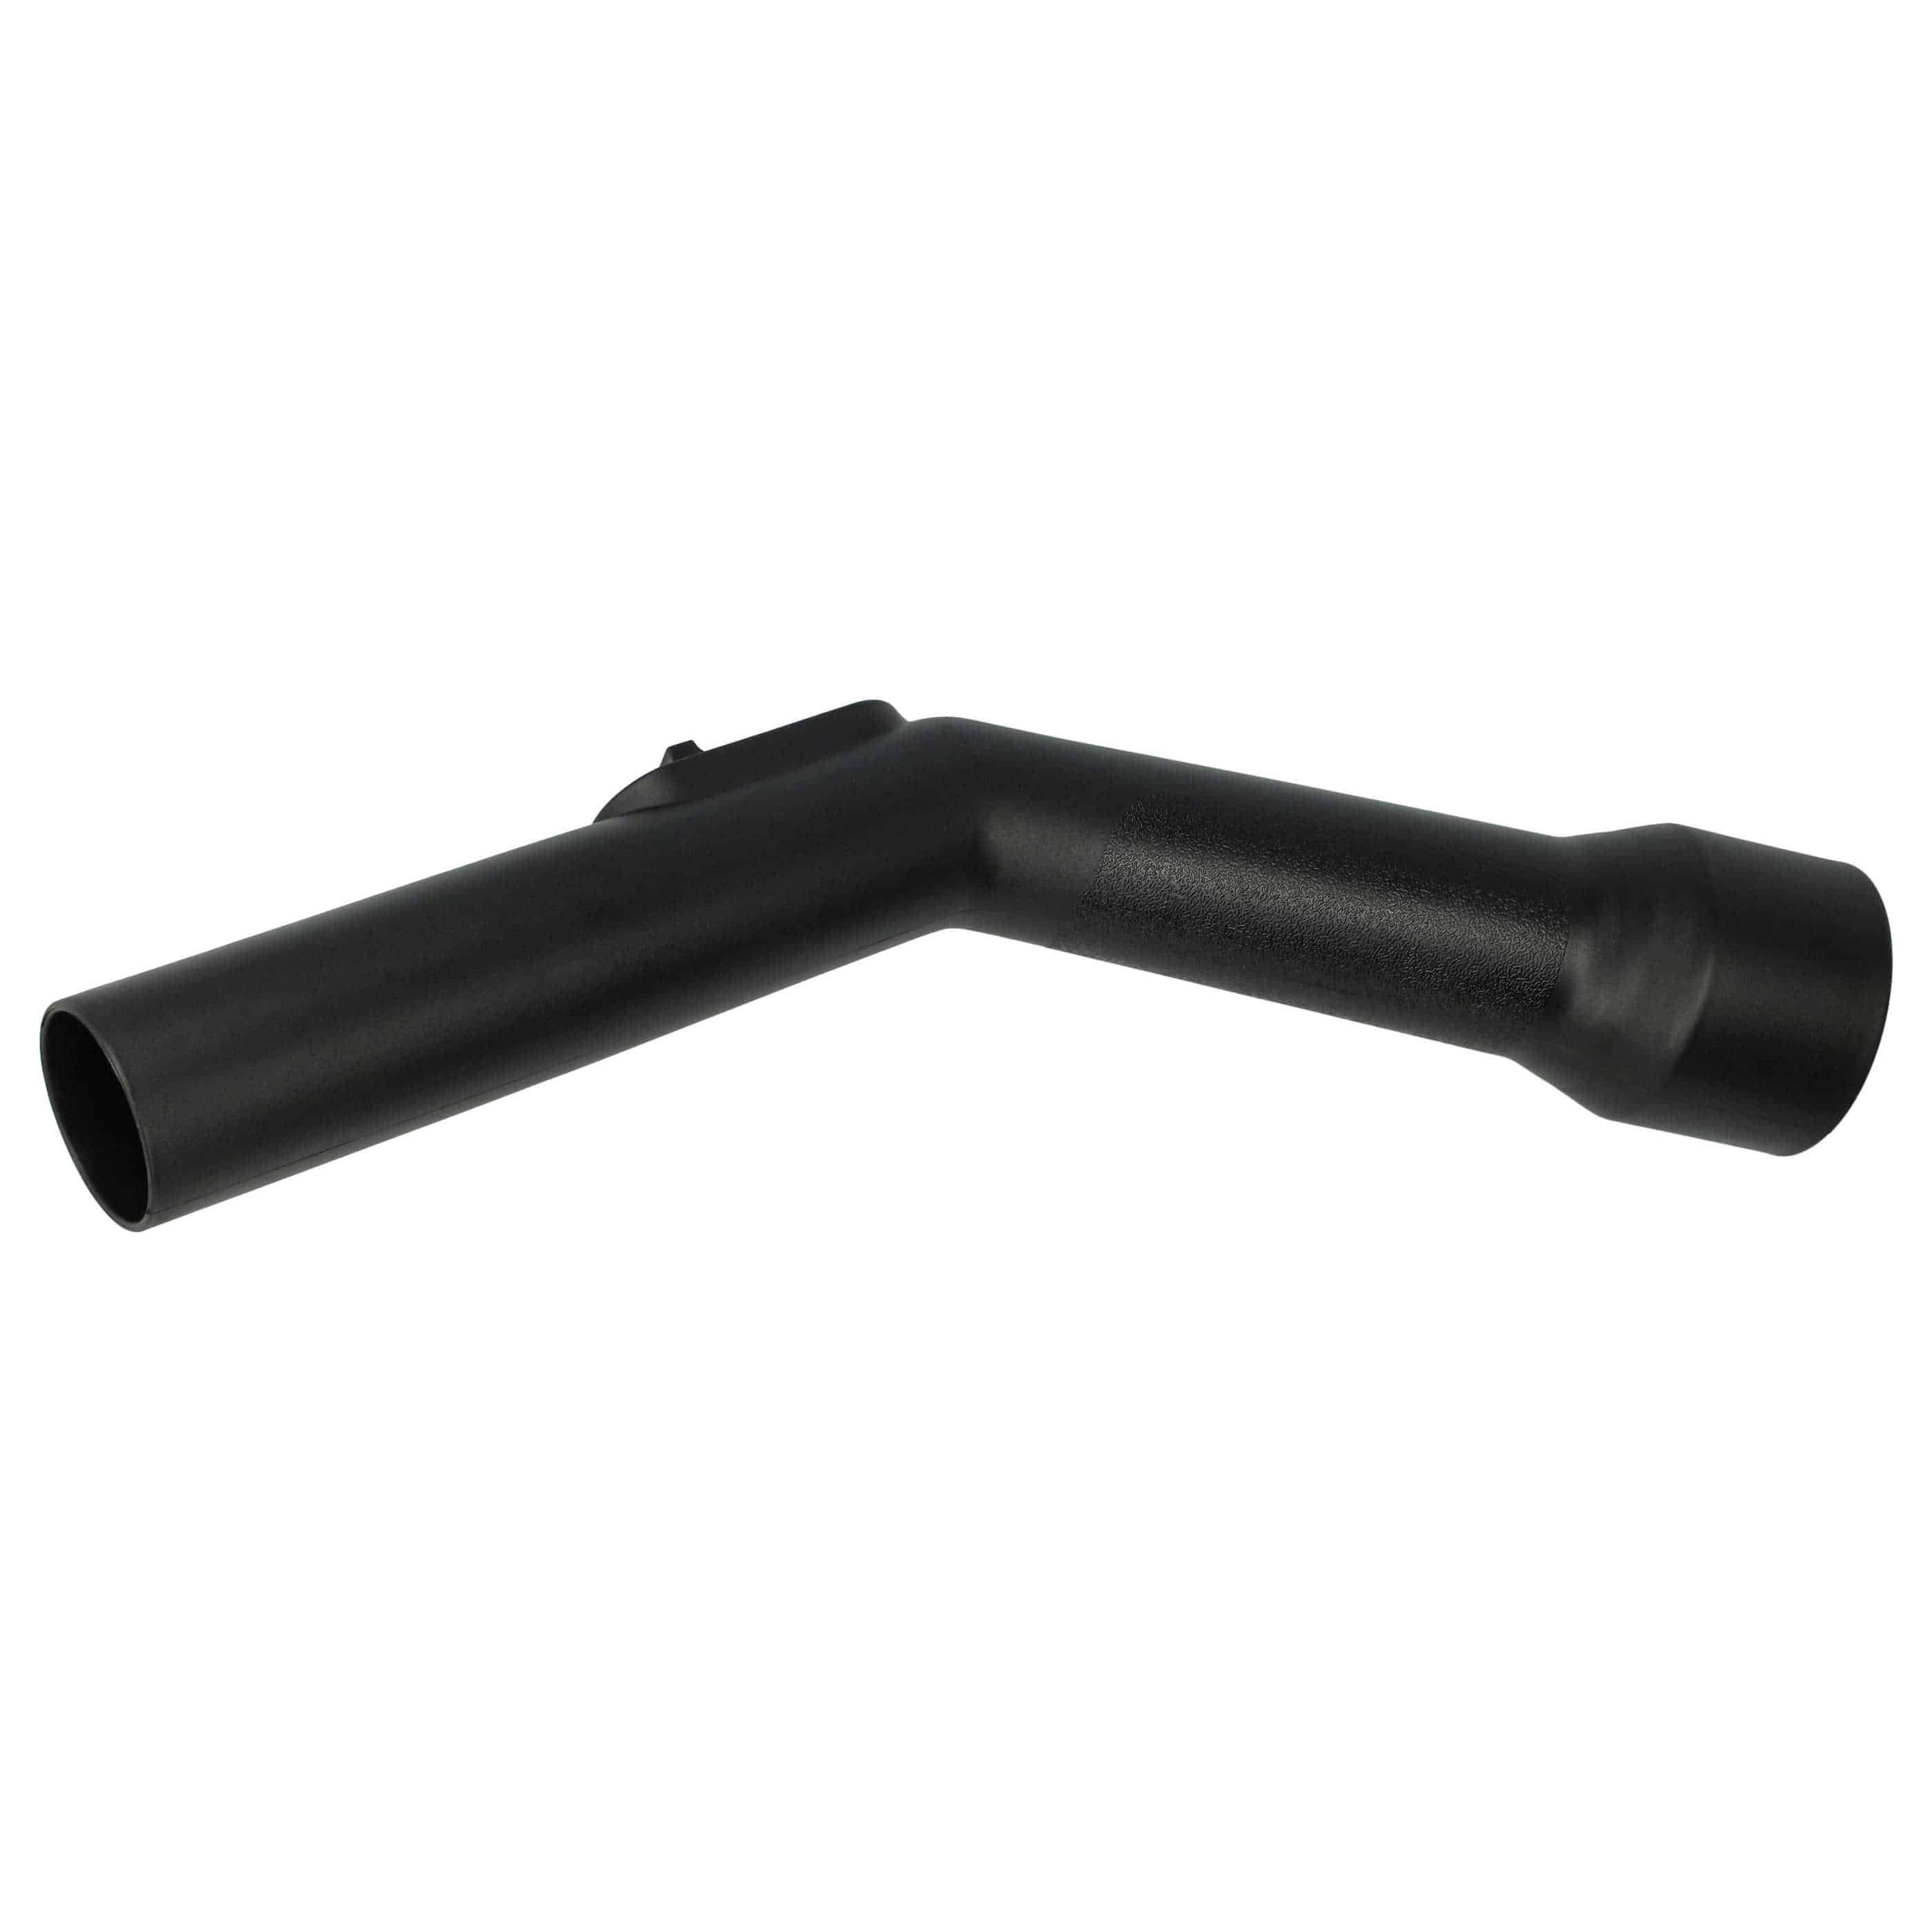 Vacuum Cleaner Handle as Replacement for Miele Vacuum Cleaner Handle 526909194426003565460